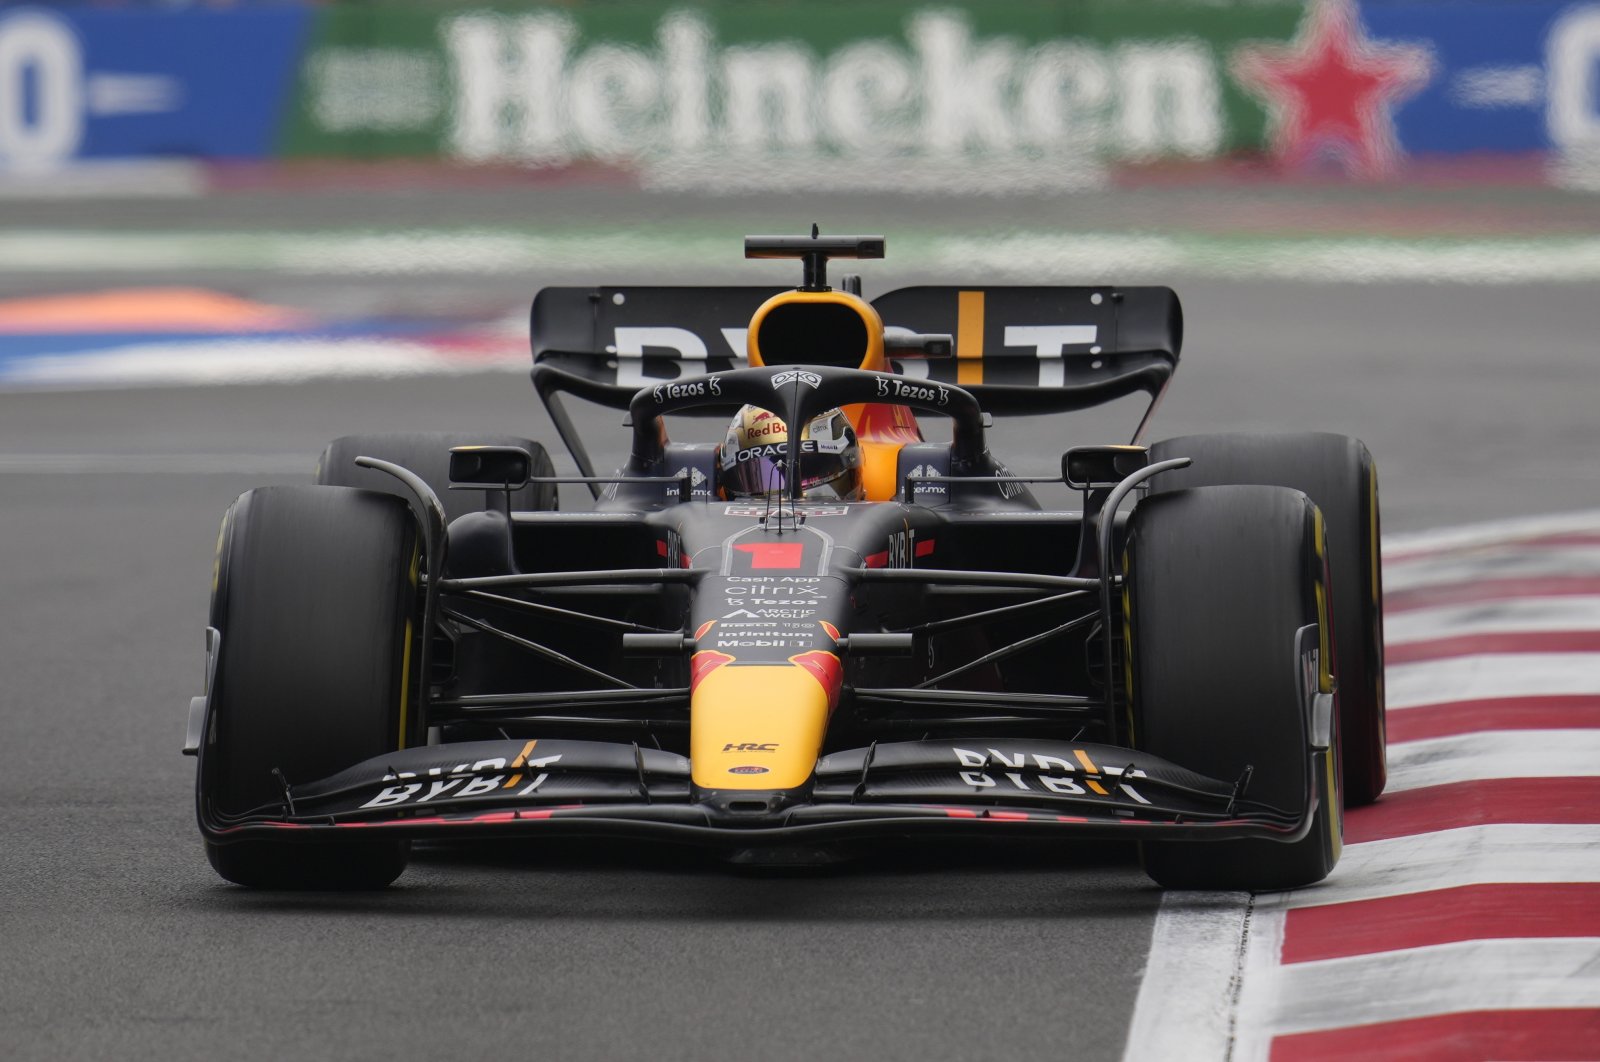 Dutch Formula One driver Max Verstappen of Red Bull Racing in action during the Formula One Grand Prix of Mexico City at the Circuit of Hermanos Rodriguez, Mexico City, Mexico, Oct. 30, 2022. (EPA Photo)